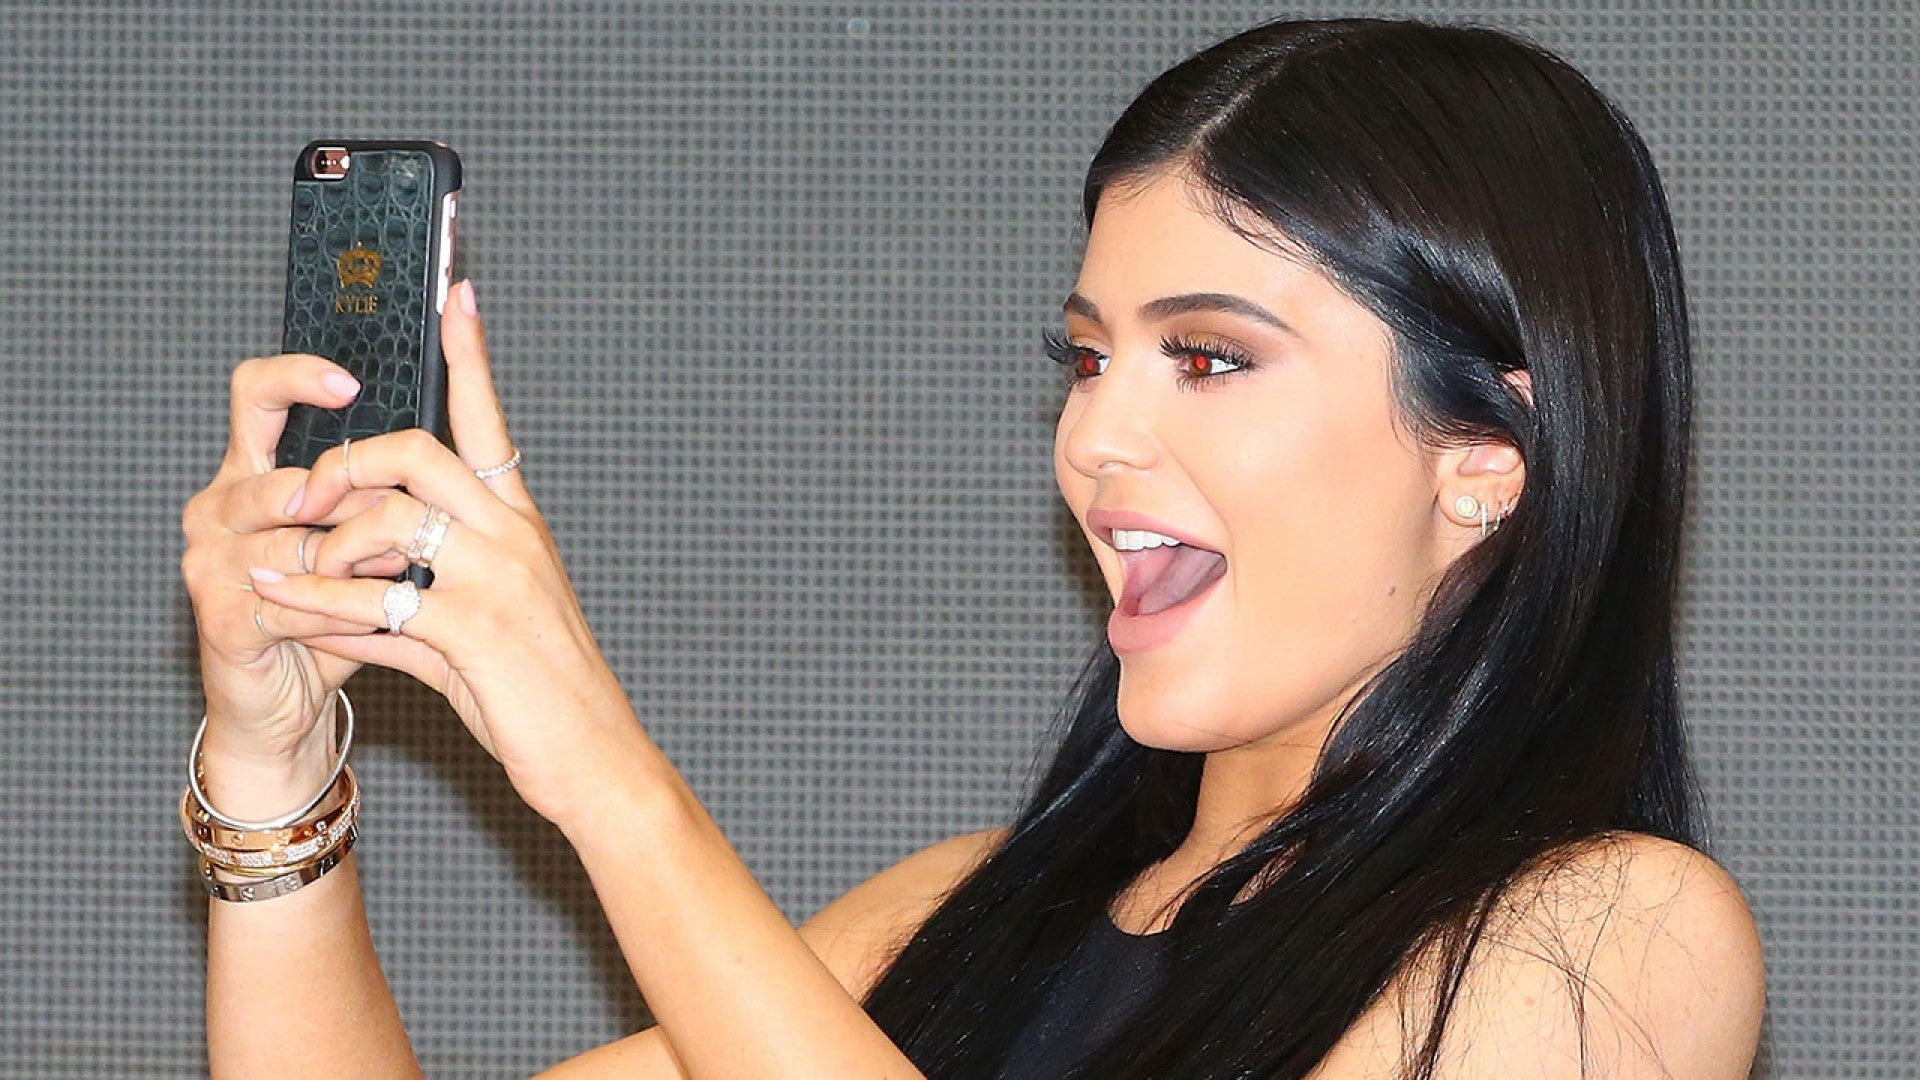 Kylie Jenner's Cartier Bracelet Has Been Stuck on Her Wrist for 4 Years |  Entertainment Tonight